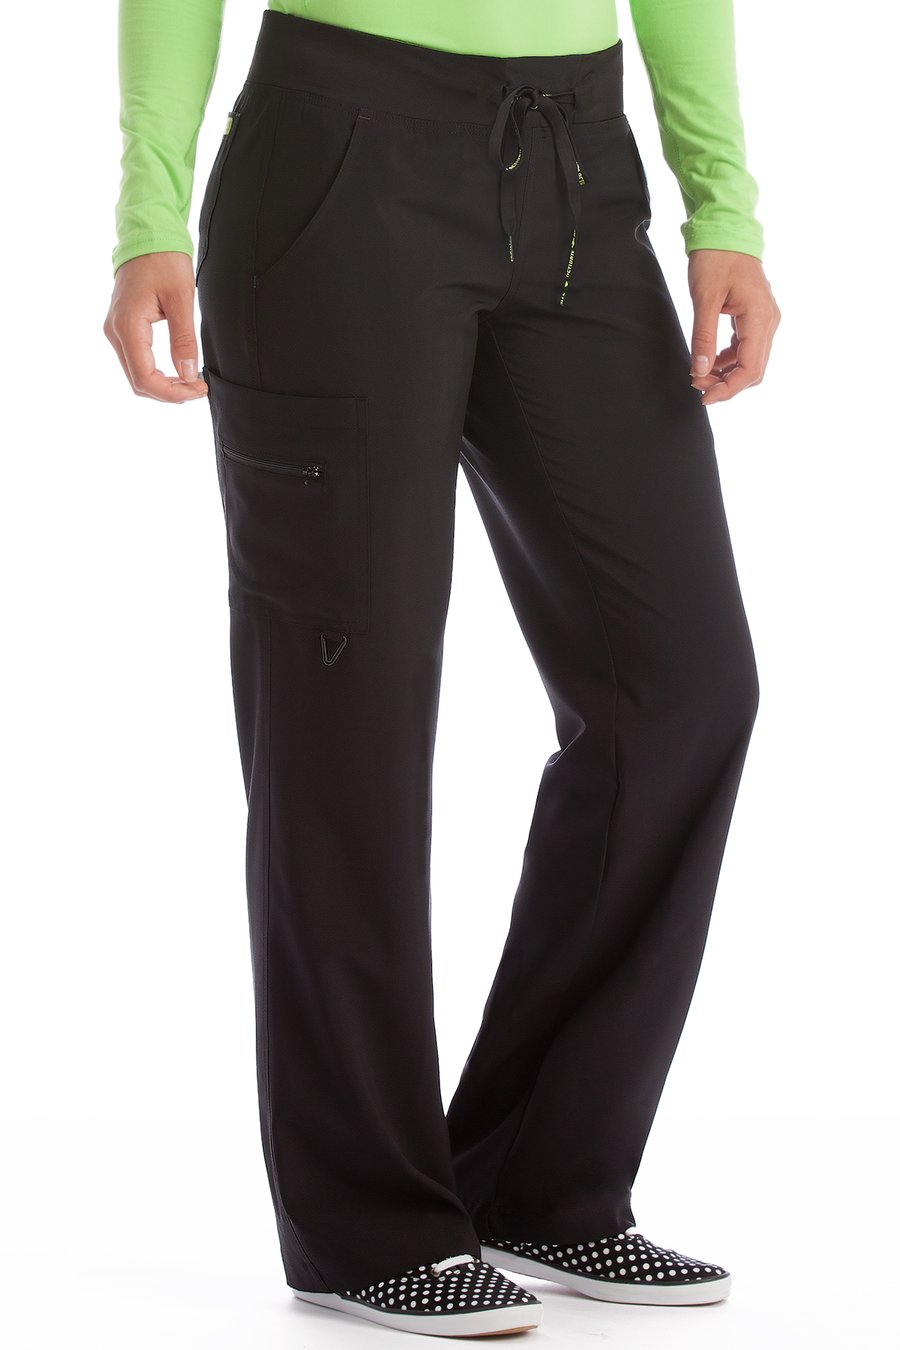 Yoga 1 Cargo Pocket Pants by Med Couture (Petite) XS-XL   / BLACK